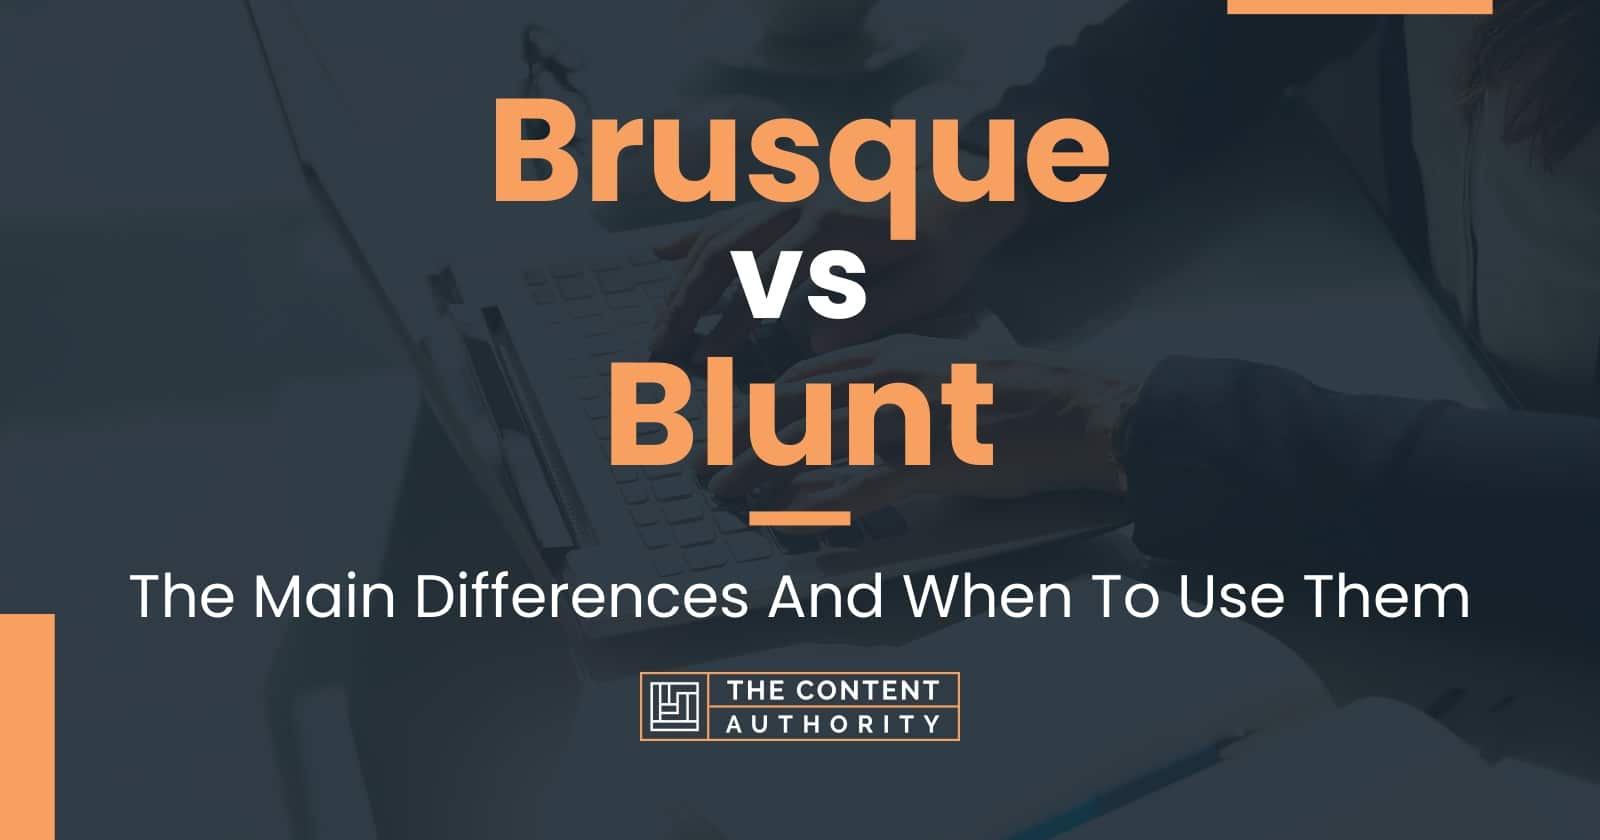 Brusque vs Blunt: The Main Differences And When To Use Them